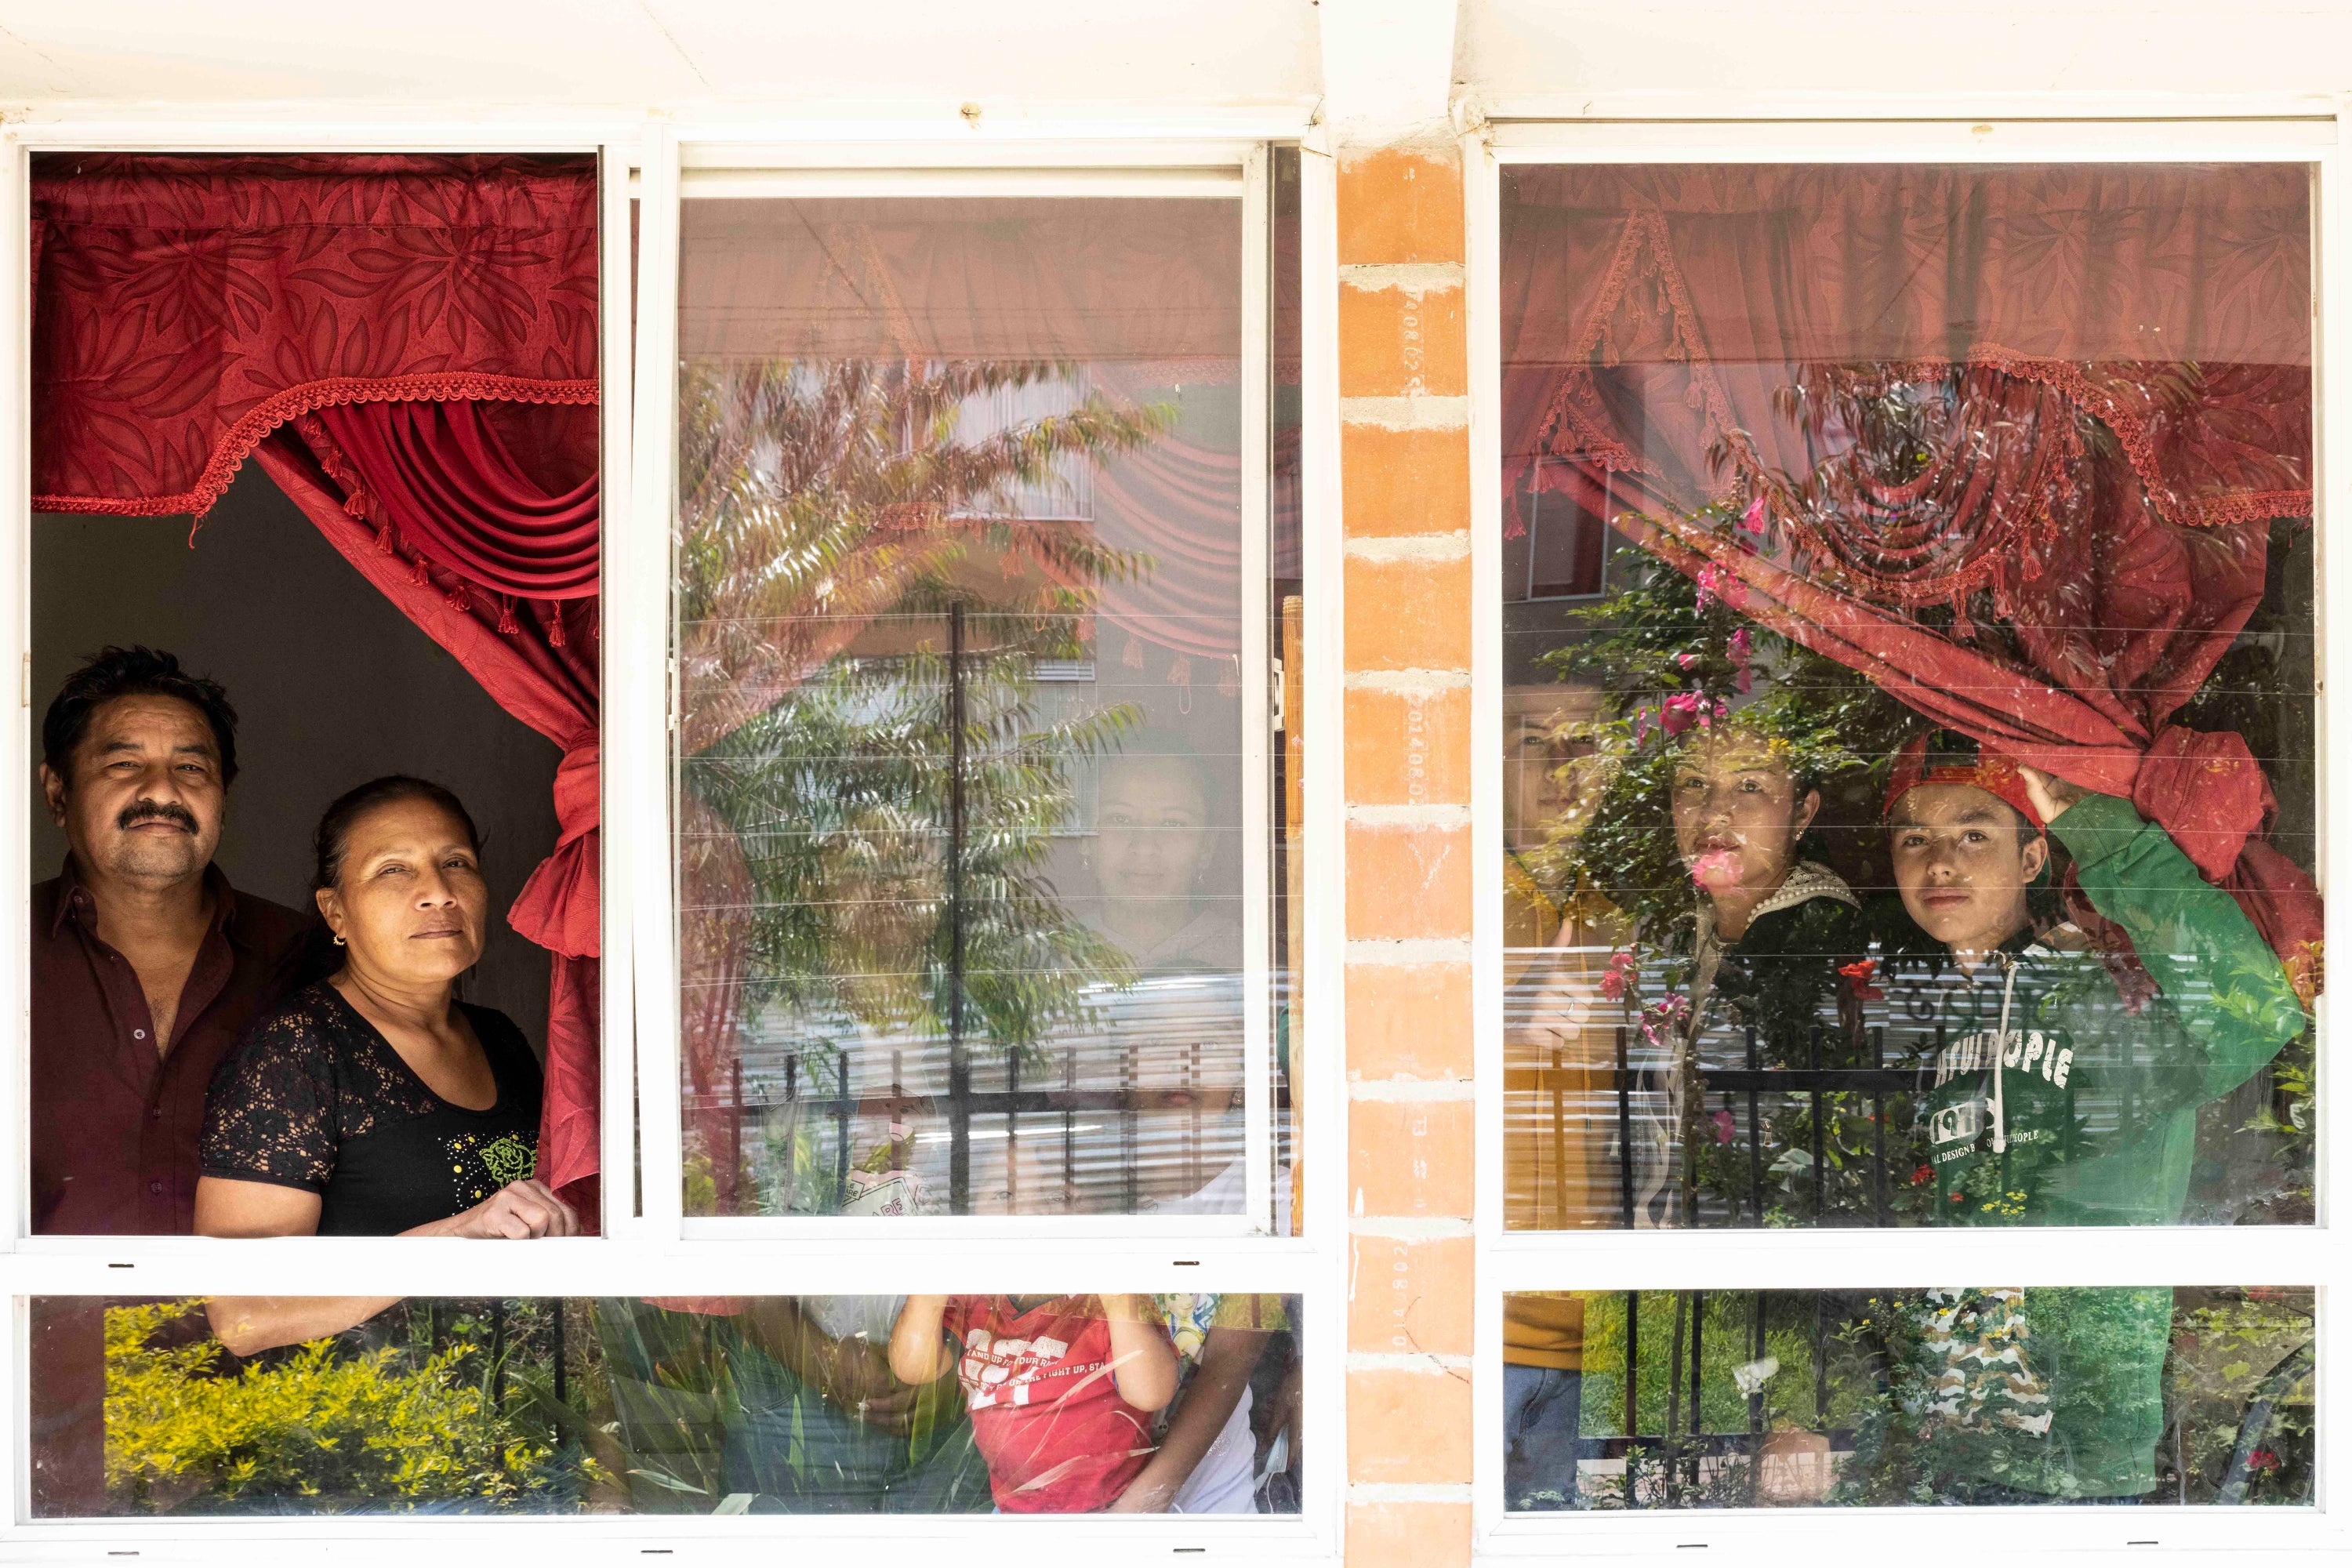 Efren Bocanegra, his wife Atenais Mendez and their family share a small home in Bogota that they received from the government after being displaced